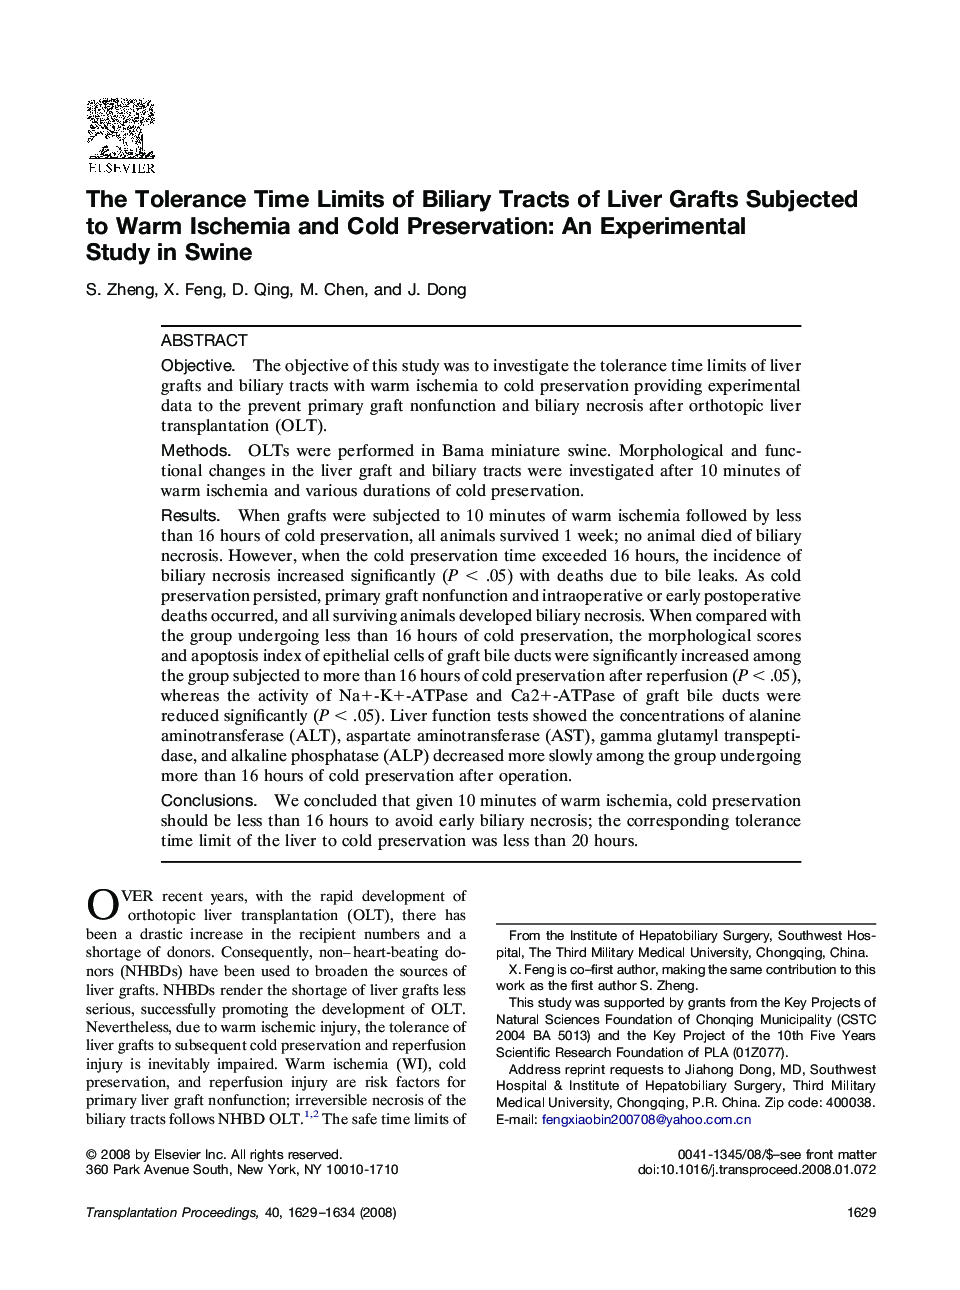 The Tolerance Time Limits of Biliary Tracts of Liver Grafts Subjected to Warm Ischemia and Cold Preservation: An Experimental Study in Swine